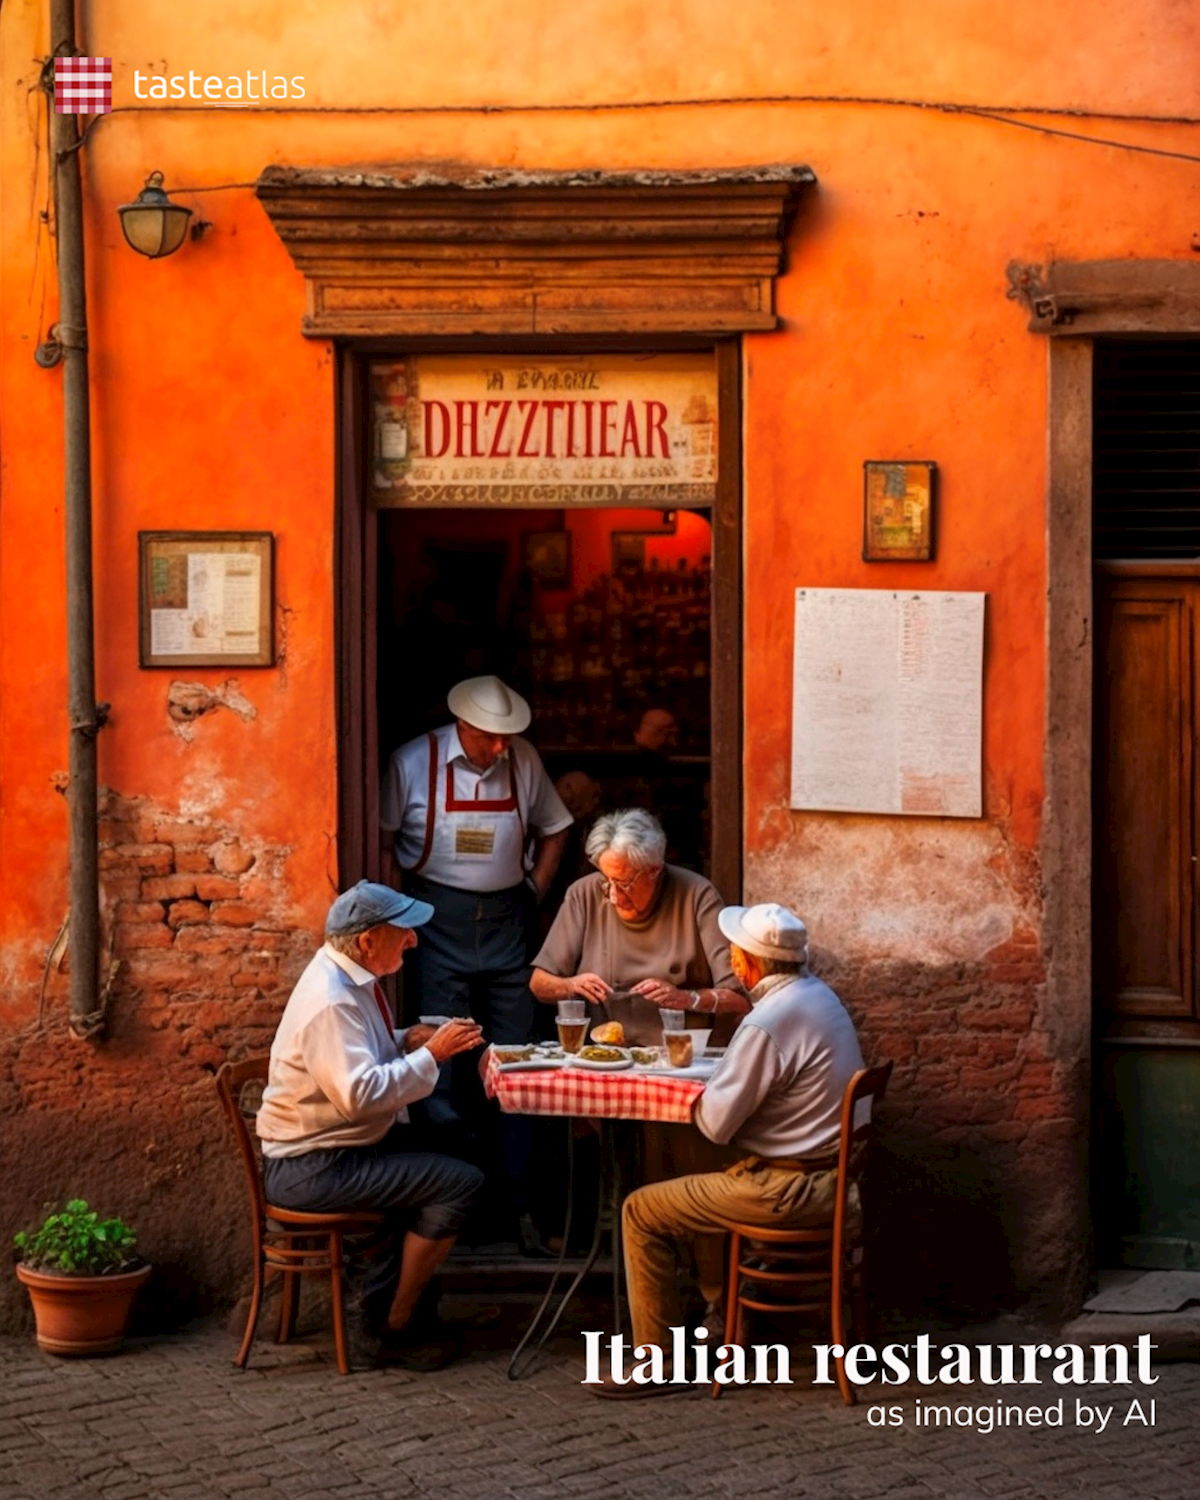 Prompt: Imagine locals eating in a traditional Italian restaurant